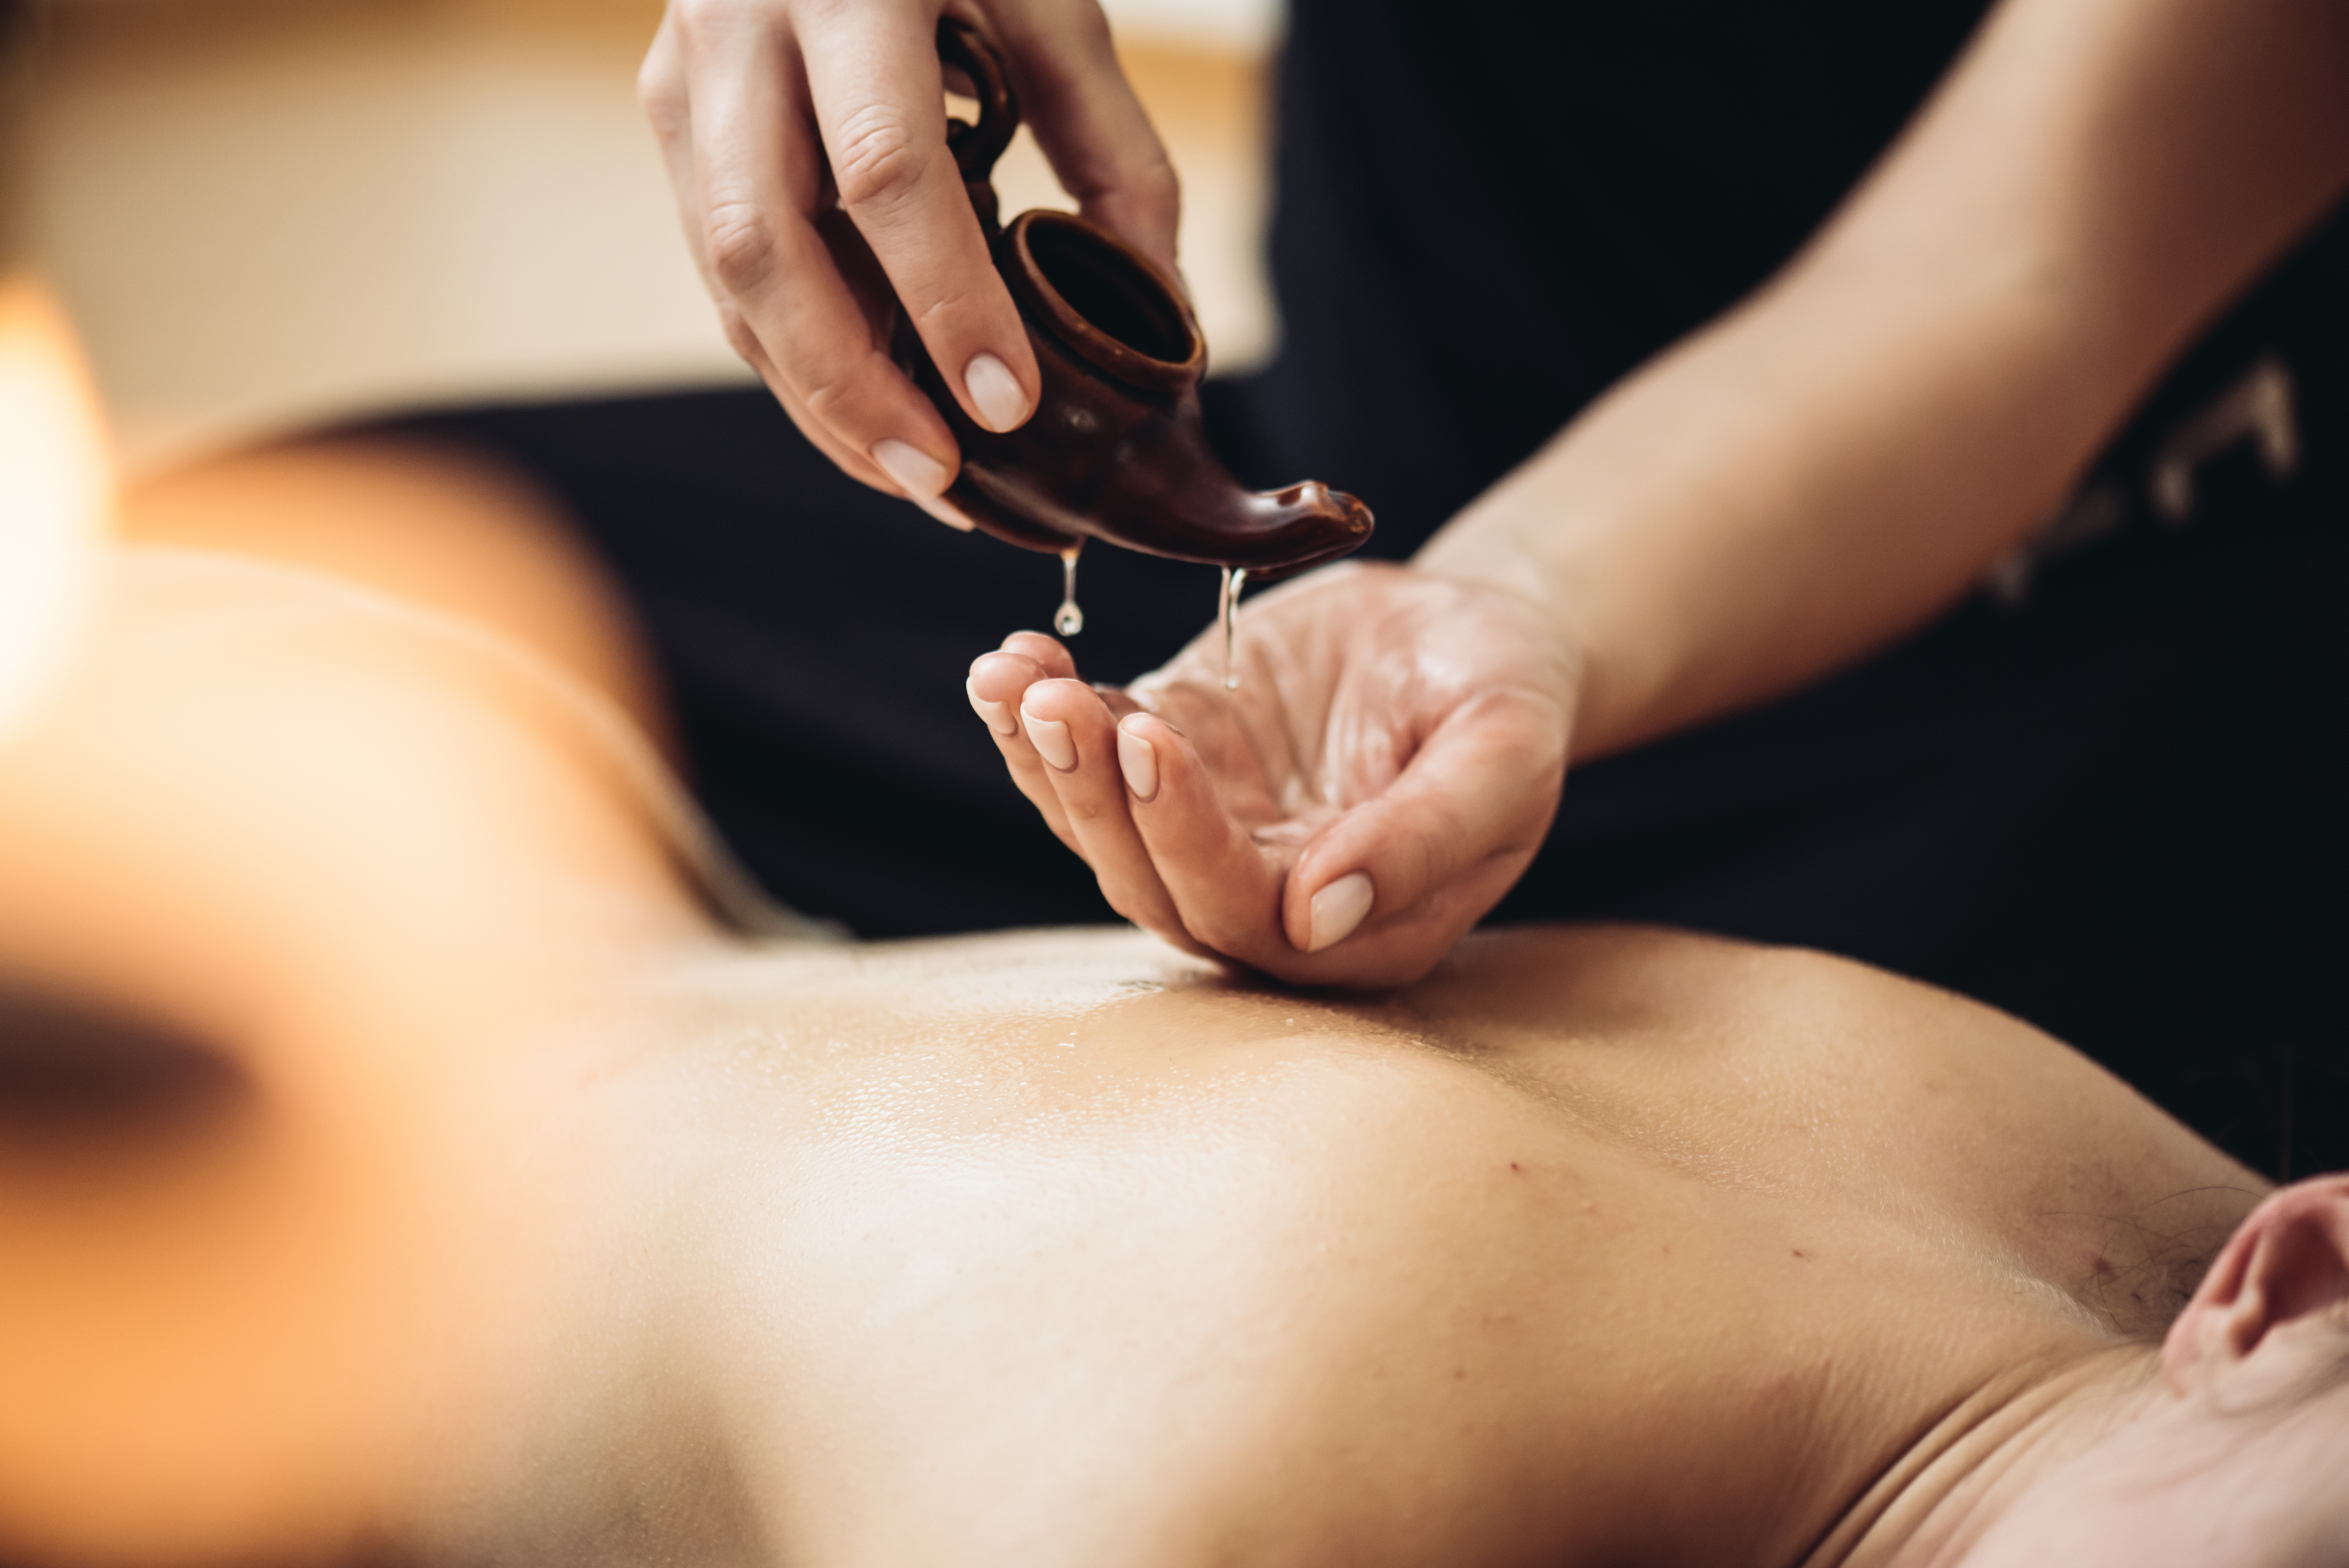 Tantric Massage in Huddersfield, Yorkshire: A Journey Within